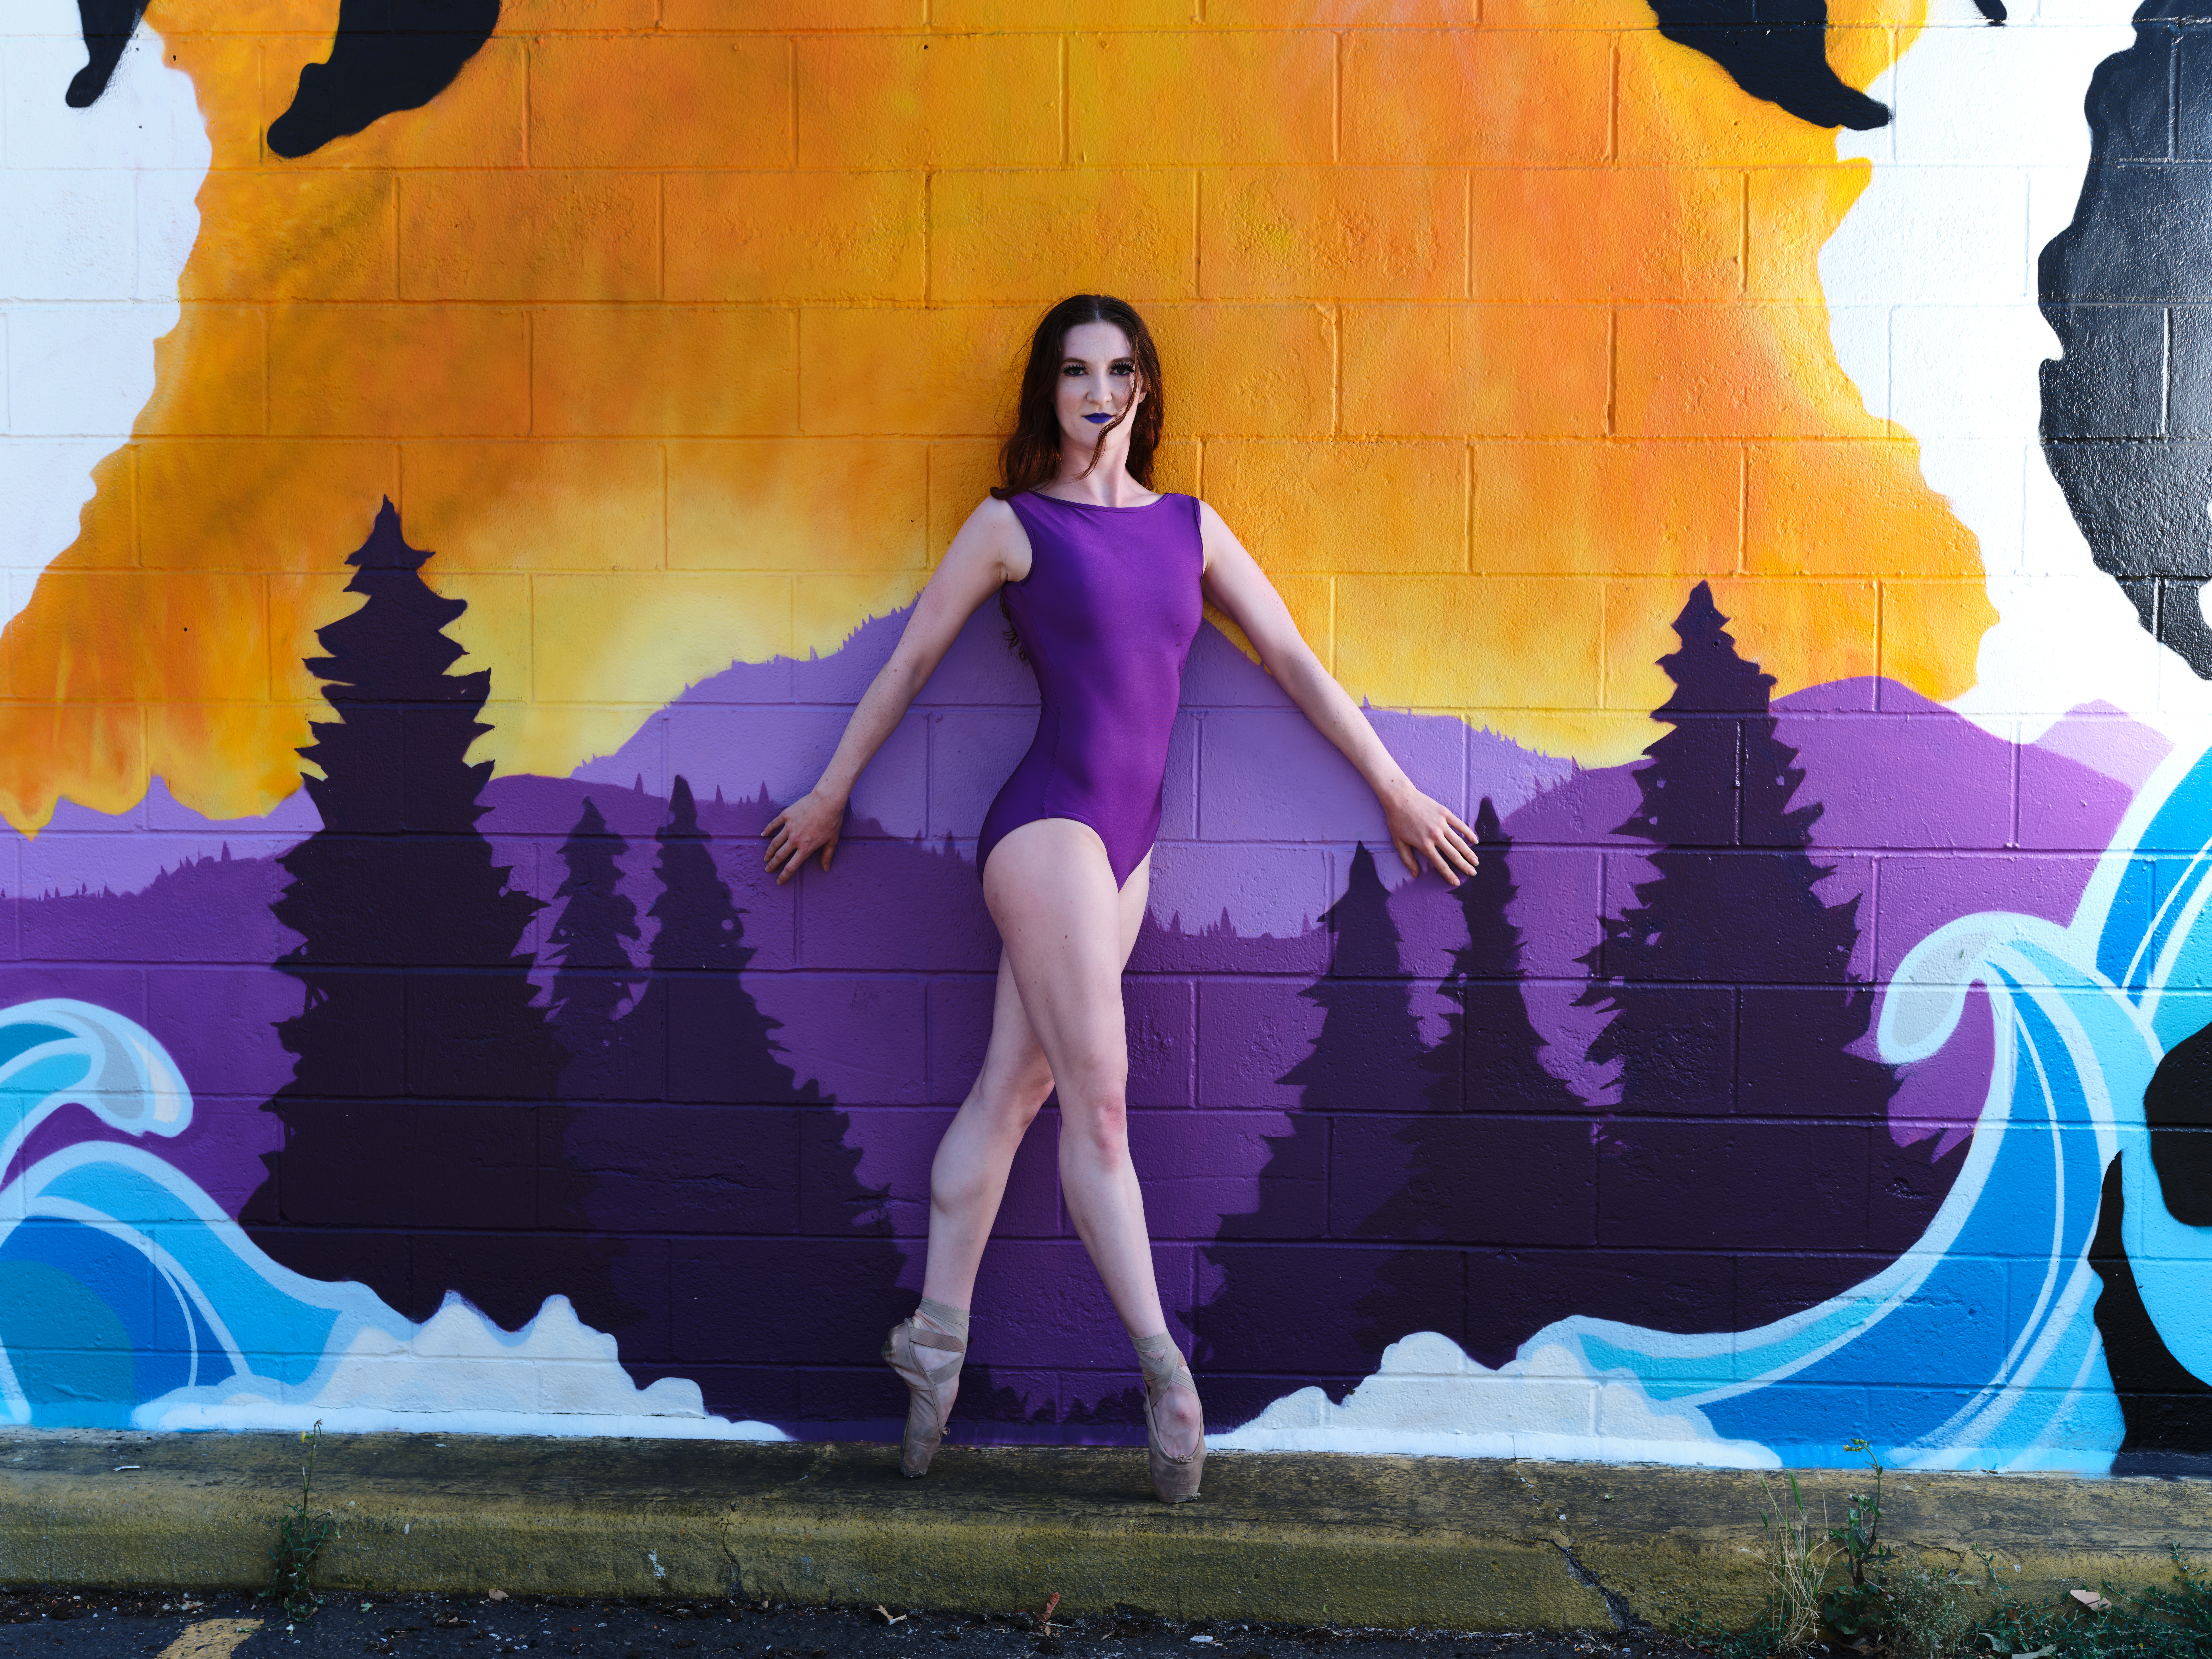 A female dancer in a bright purple leotard poses in fourth position on pointe against a building wall outside. The wall has a bold, brightly painted mural of a sunset over purple mountains and dark evergreen trees.